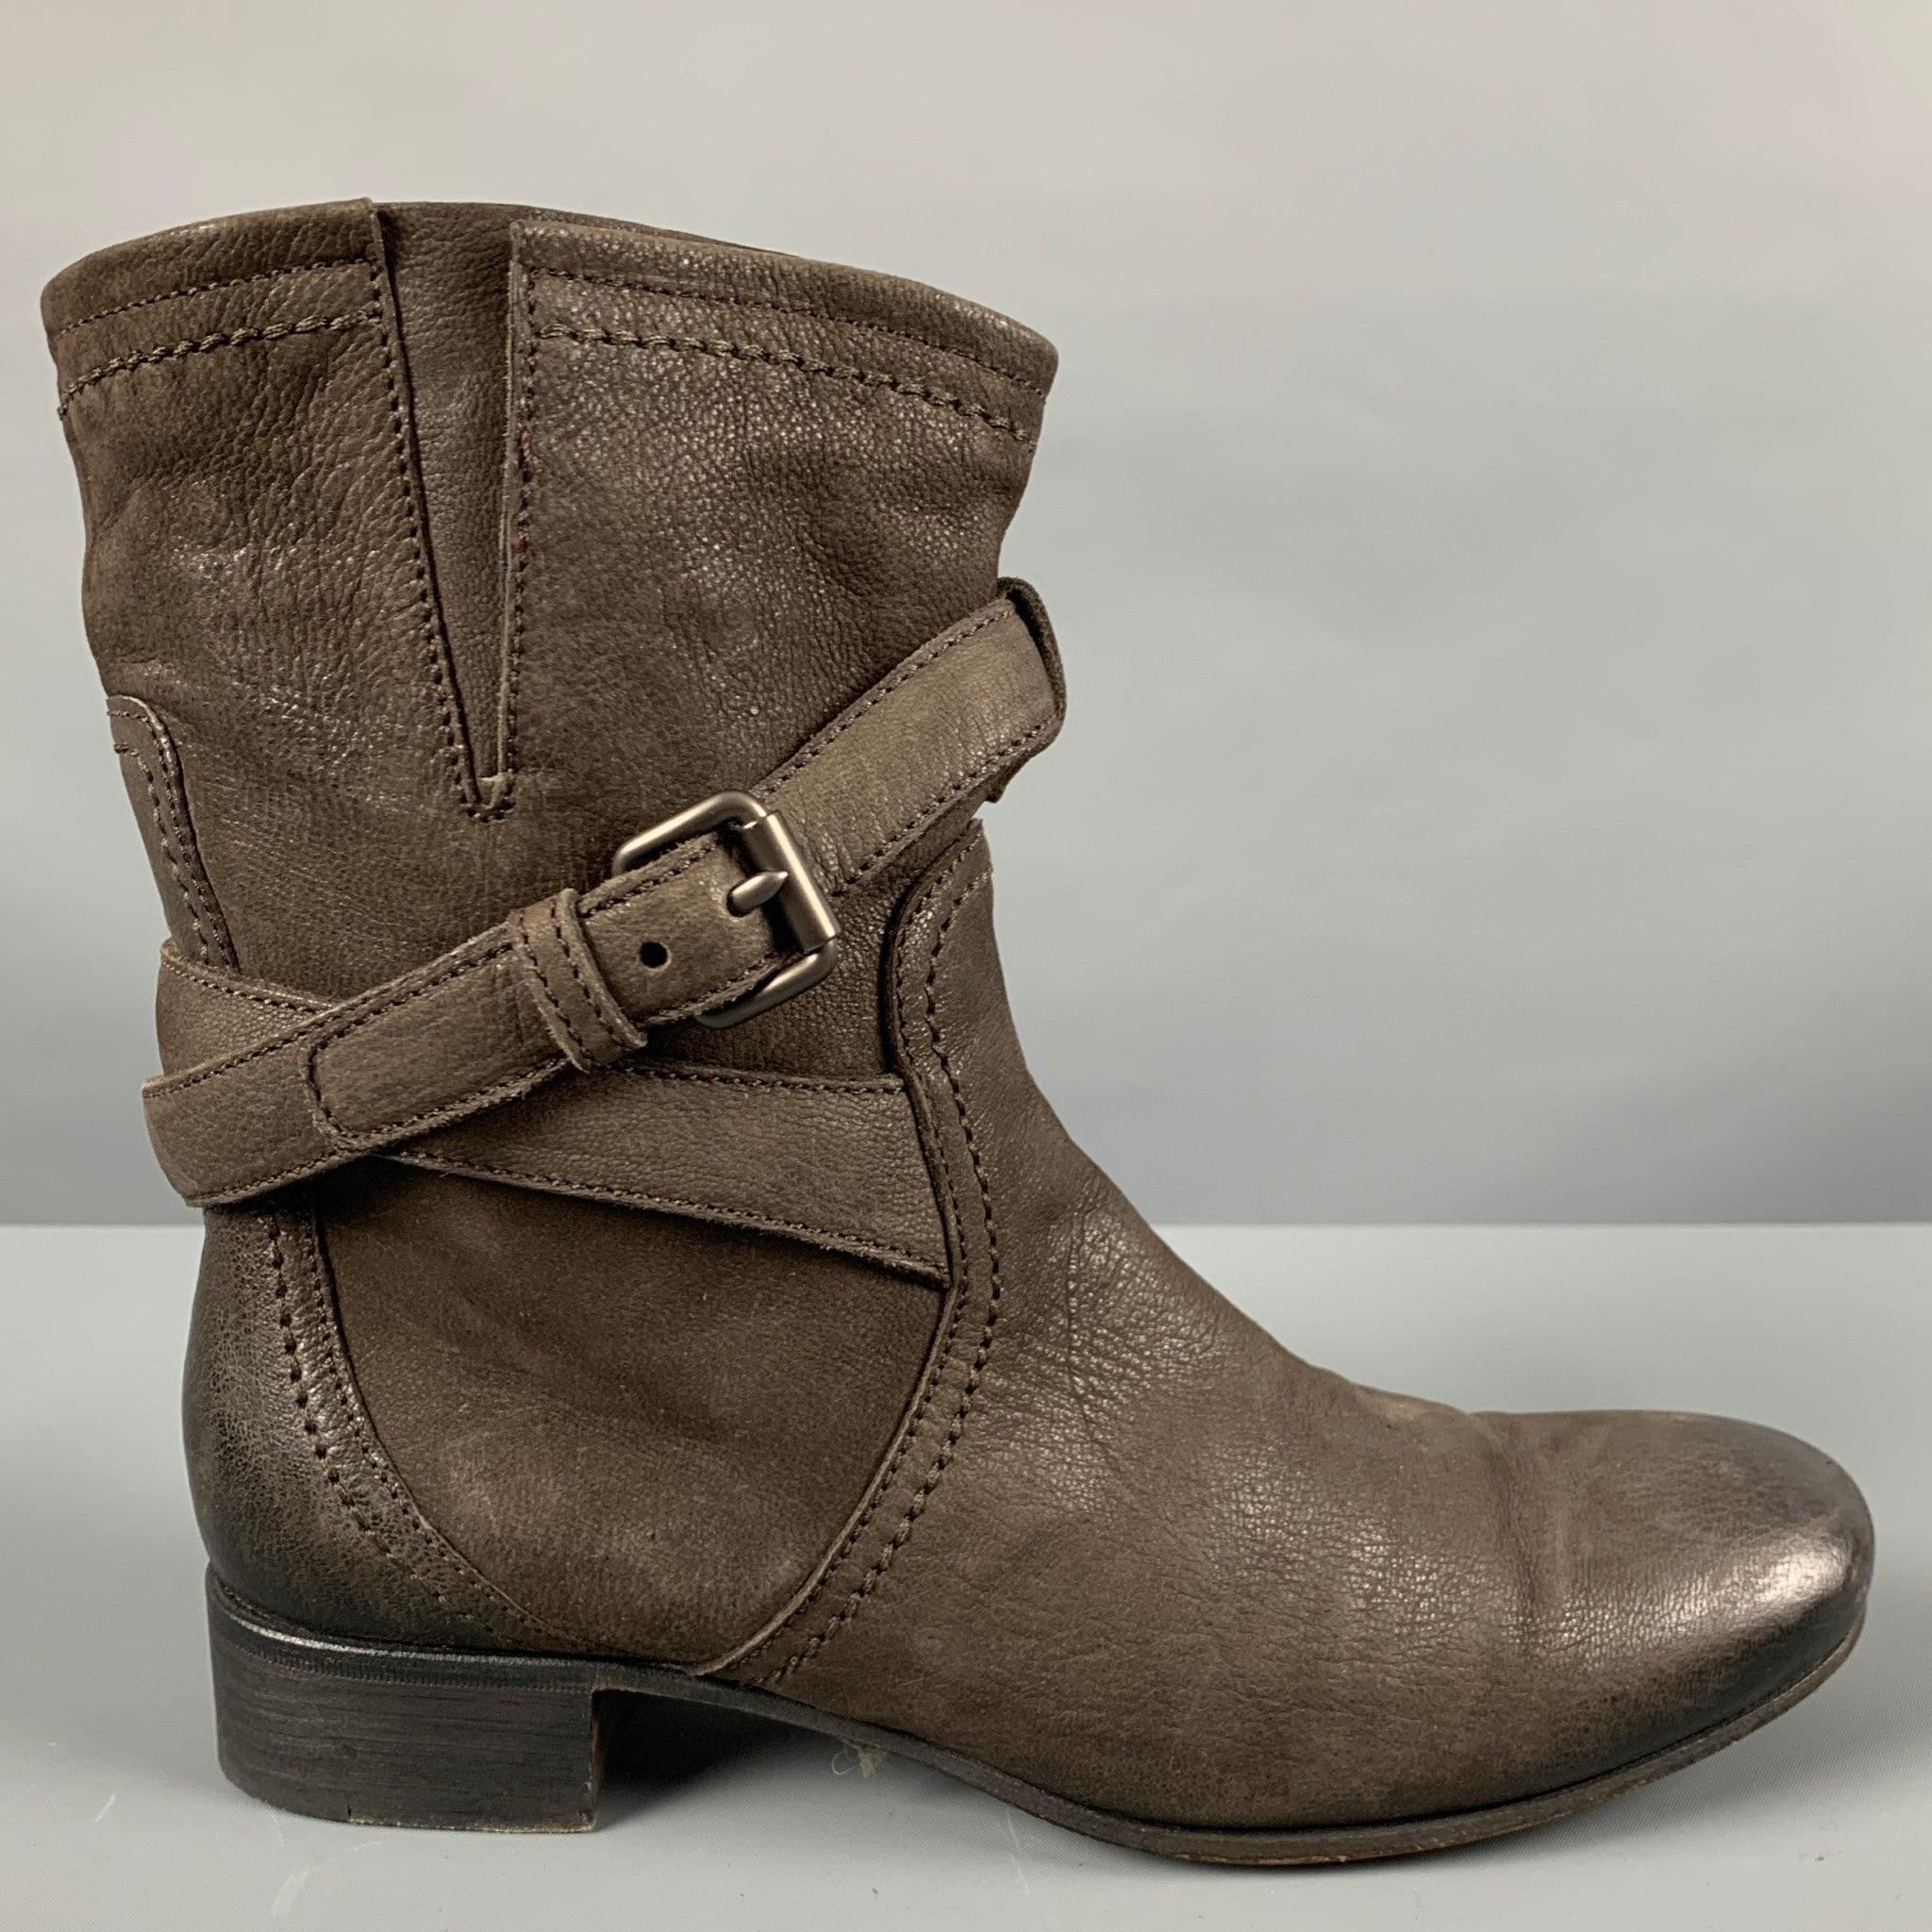 PRADA
boots in a brown leather featuring an ankle strap with gunmetal tone hardware. Made in Italy.Very Good Pre-Owned Condition. Moderate signs of wear. 

Marked:   40 

Measurements: 
  Length: 10.5 inches Width: 3.25 inches Height: 9 inches 
  
 